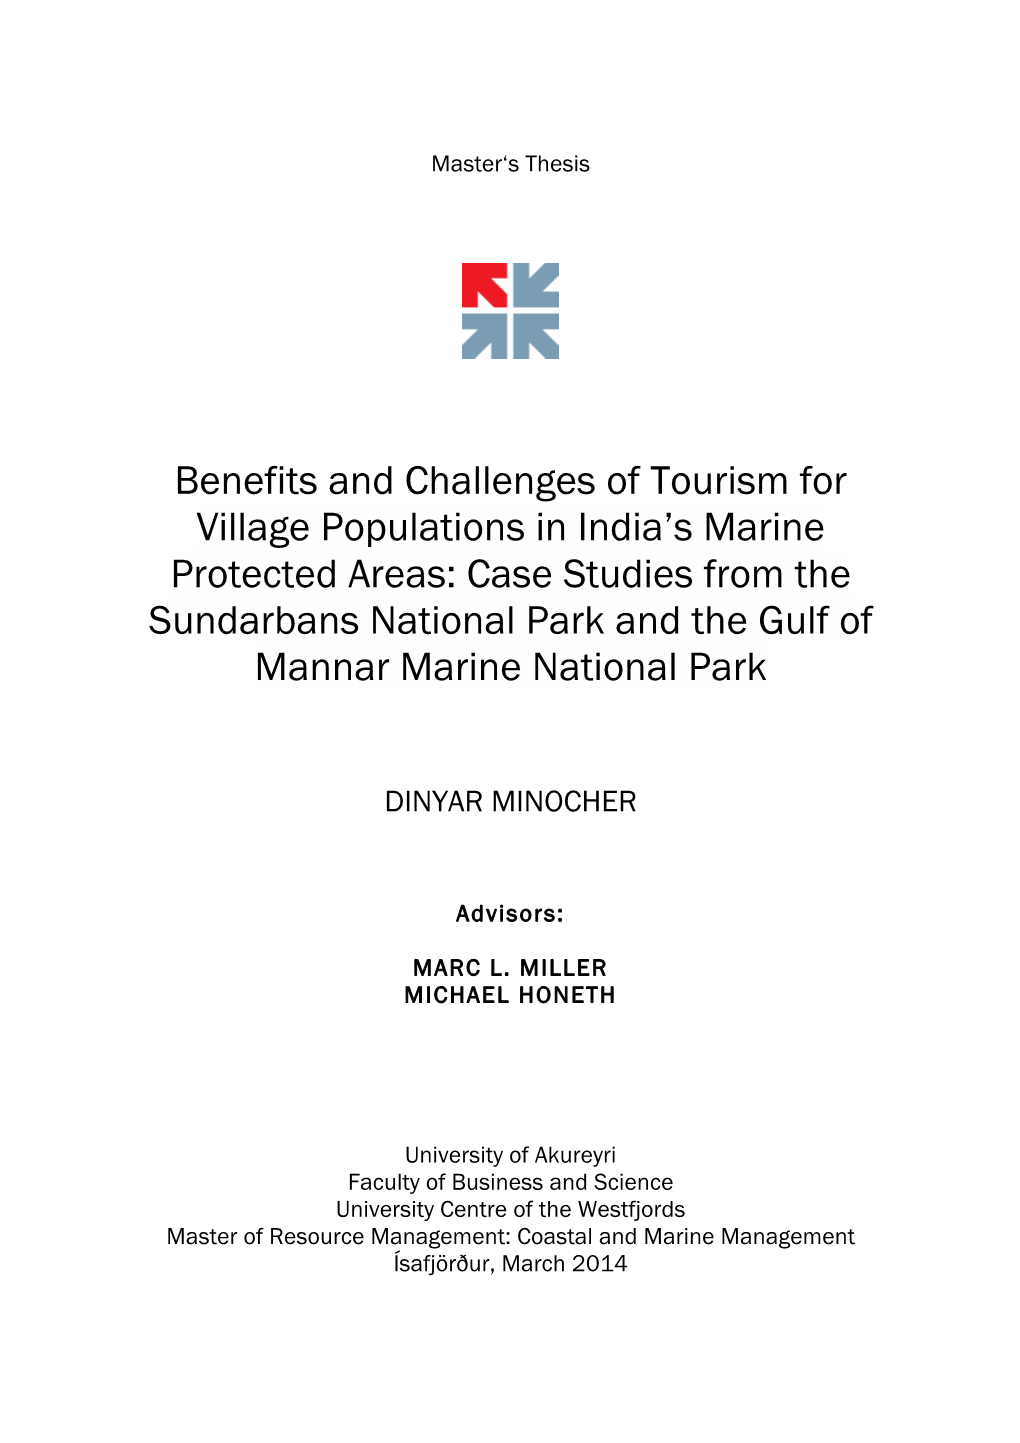 Benefits and Challenges of Tourism for Village Populations in India's